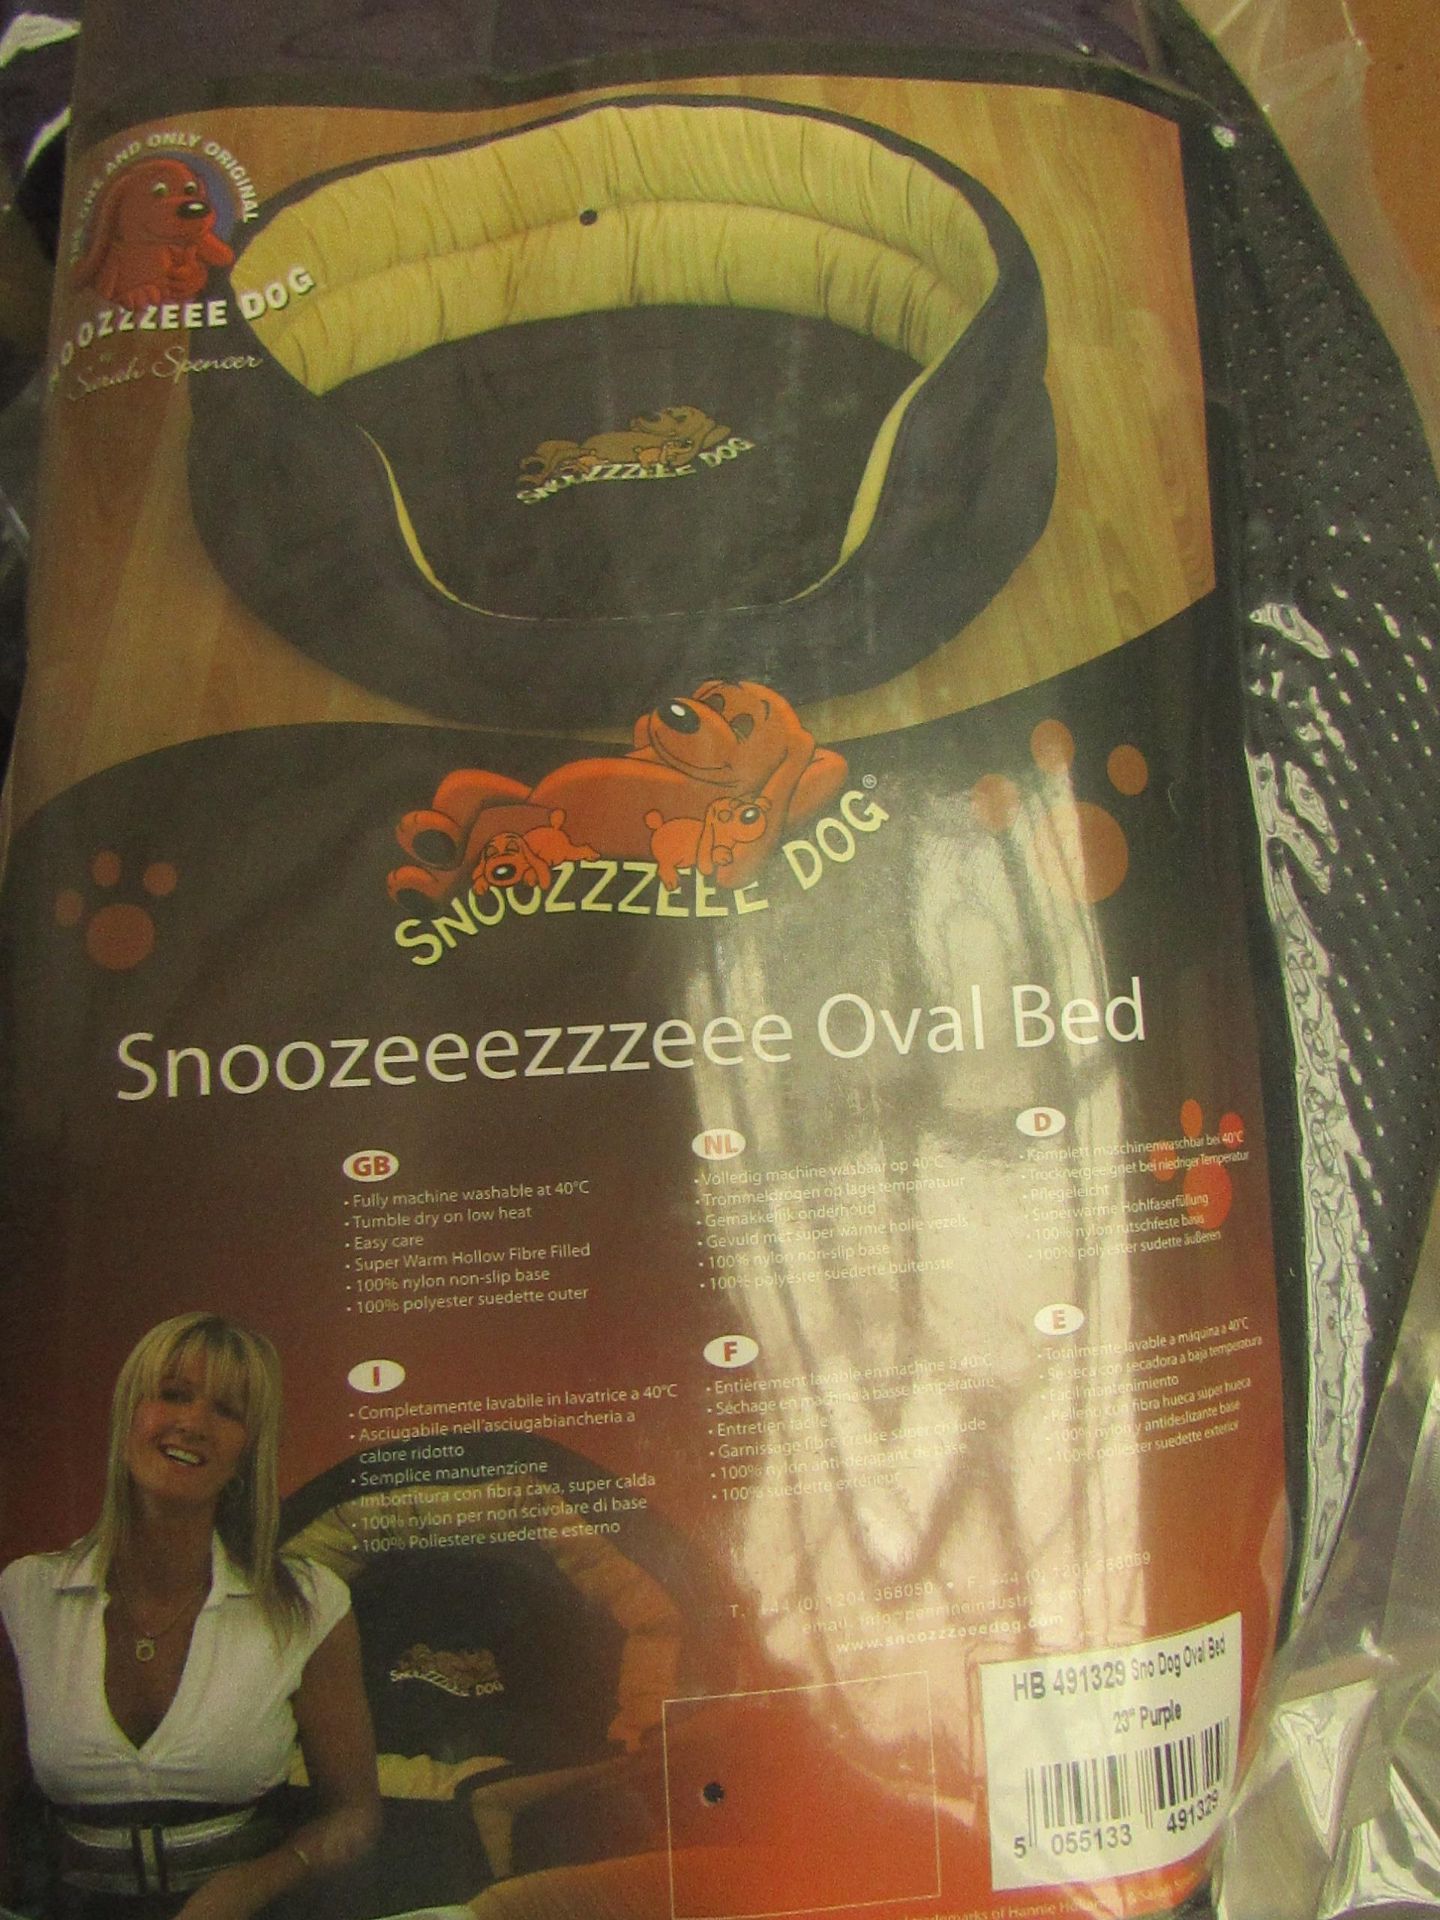 Snoozzzeee Dog - Oval Dog Bed 23" Purple - New & Packaged.